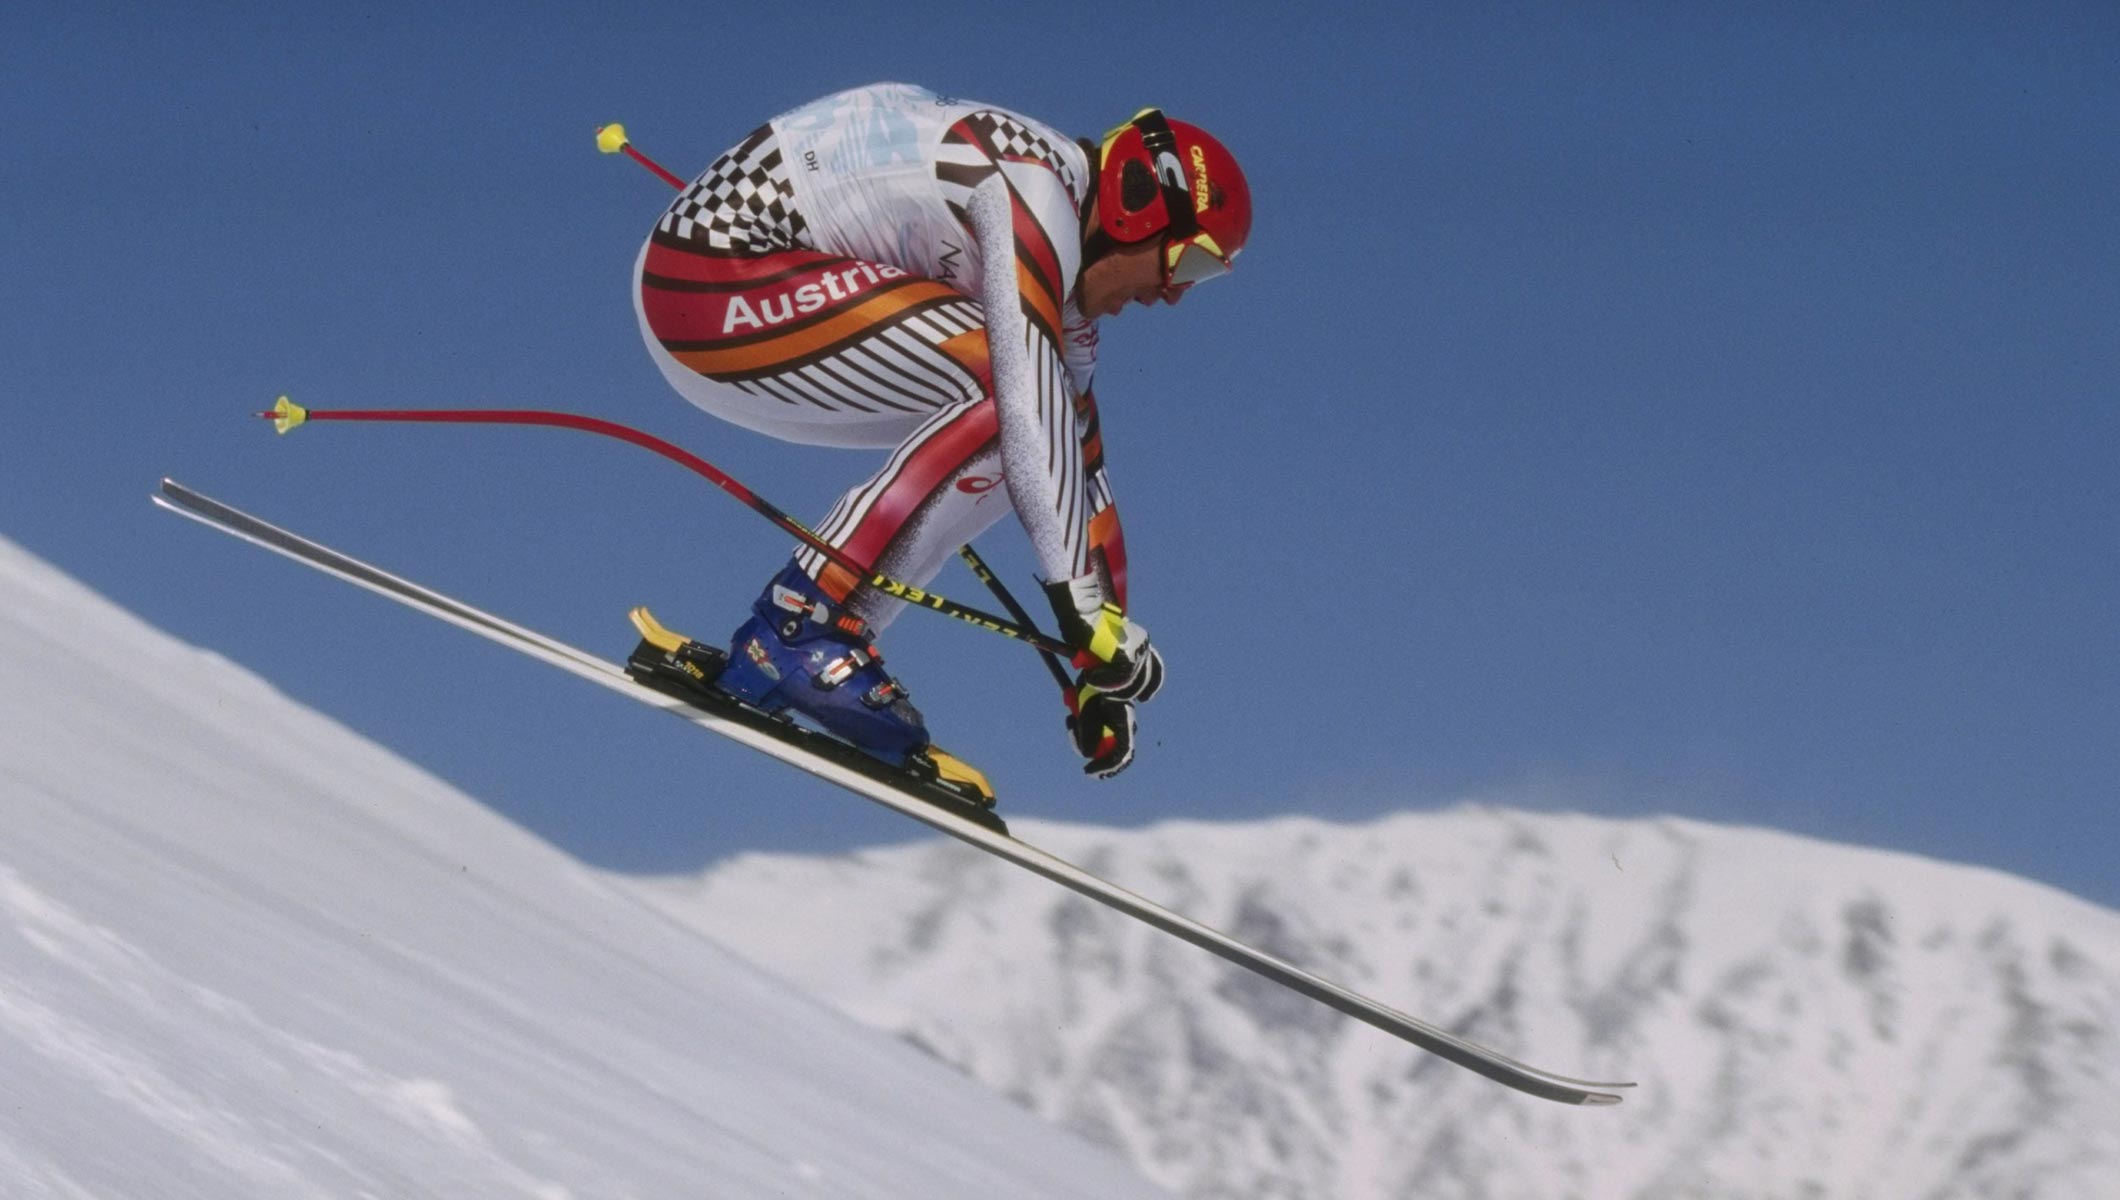 IOA gets approval from FIS to run ski and snowboard in the country